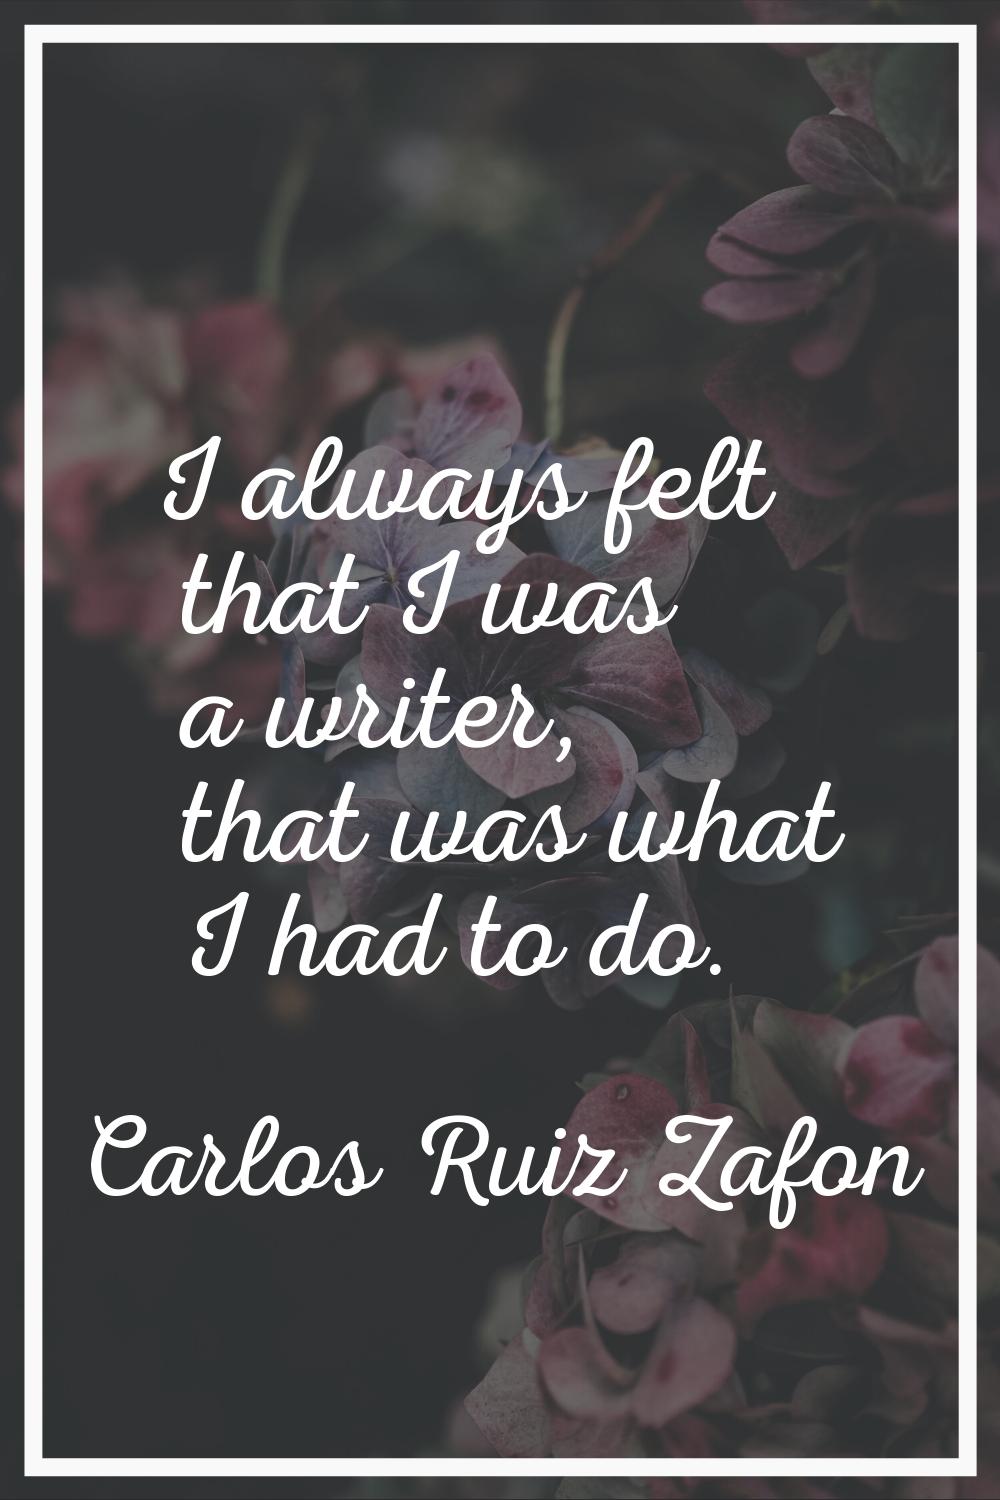 I always felt that I was a writer, that was what I had to do.